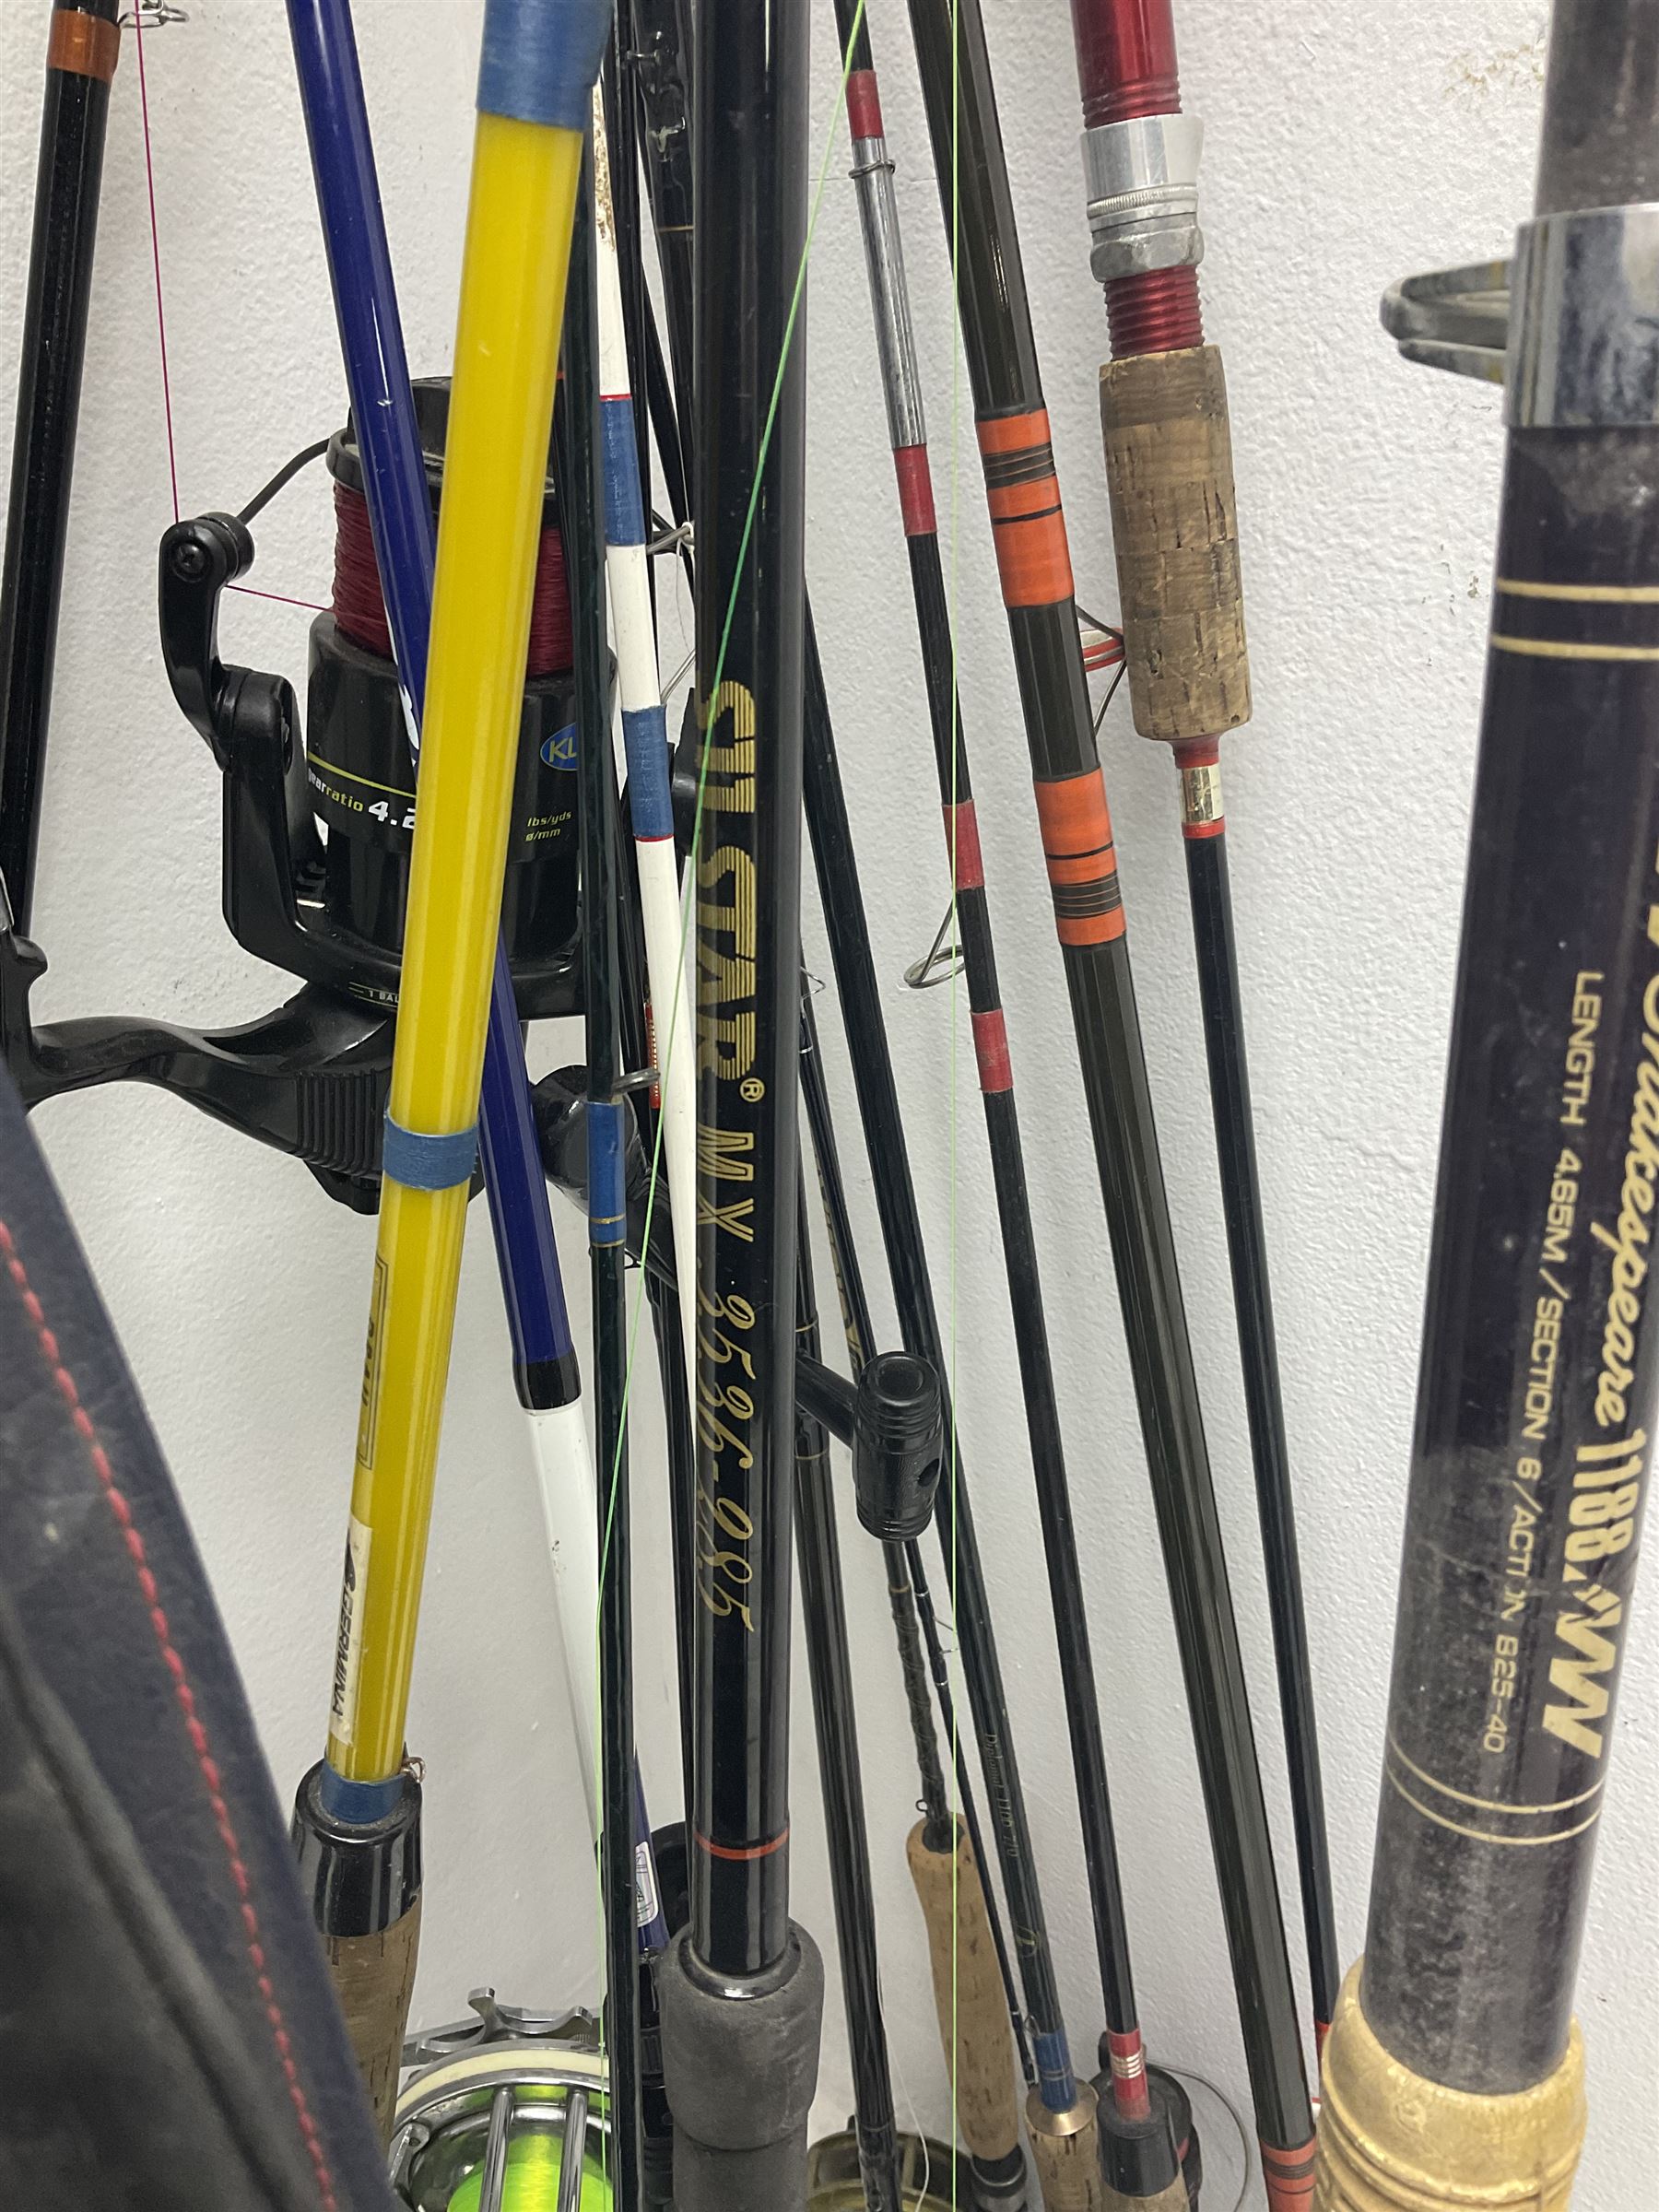 Large collection of part fishing rods and reels, maker's including Silstar,  Dynabraid and Madfish, etc - Decorative Antiques & Collectors